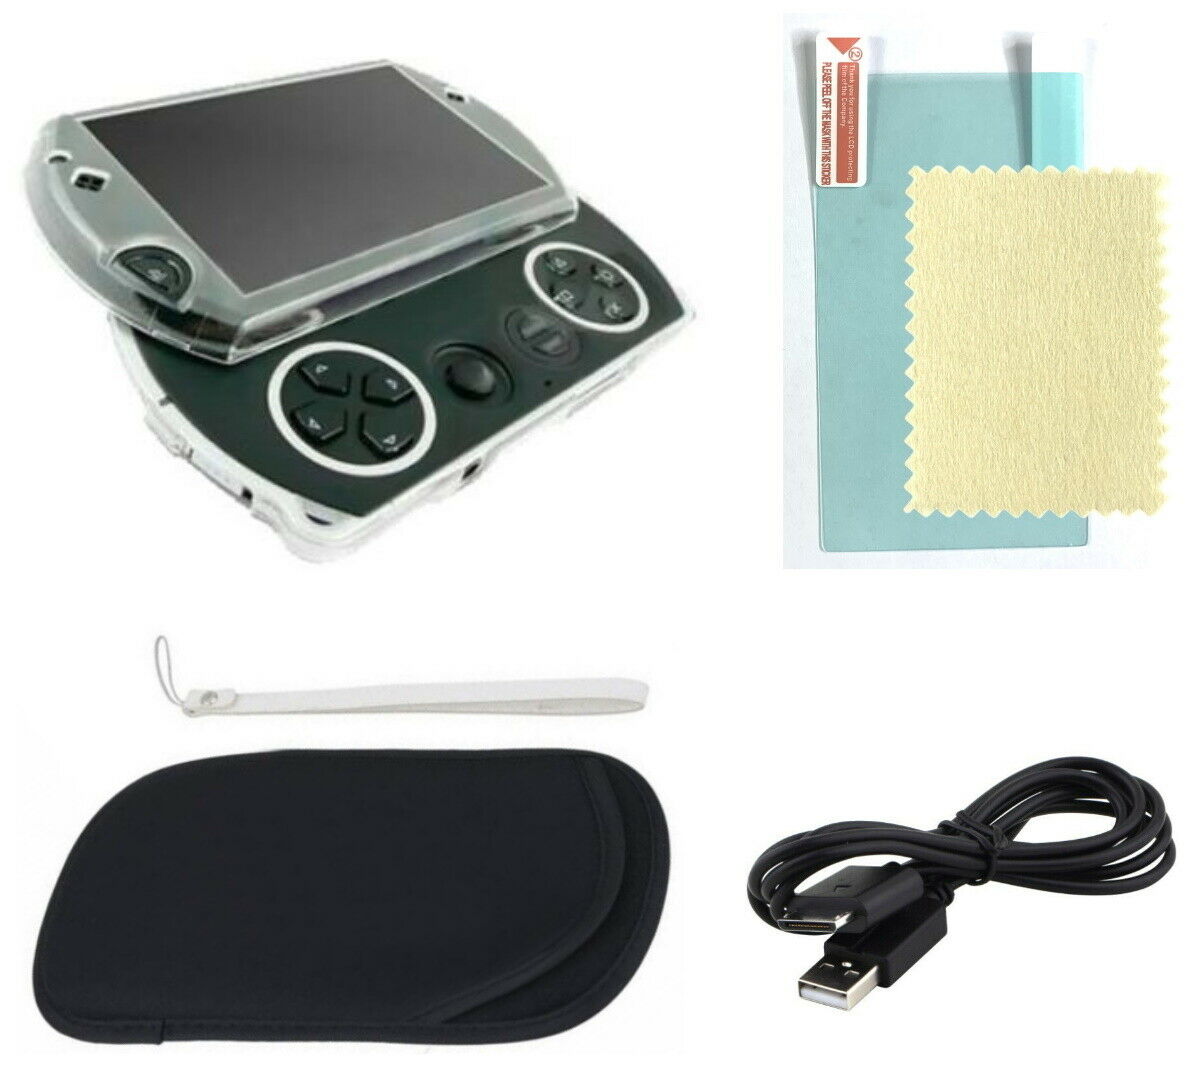 4pc Sony Psp Go Bundle Clear Case Shell + Charger + Screen Protector + Pouch